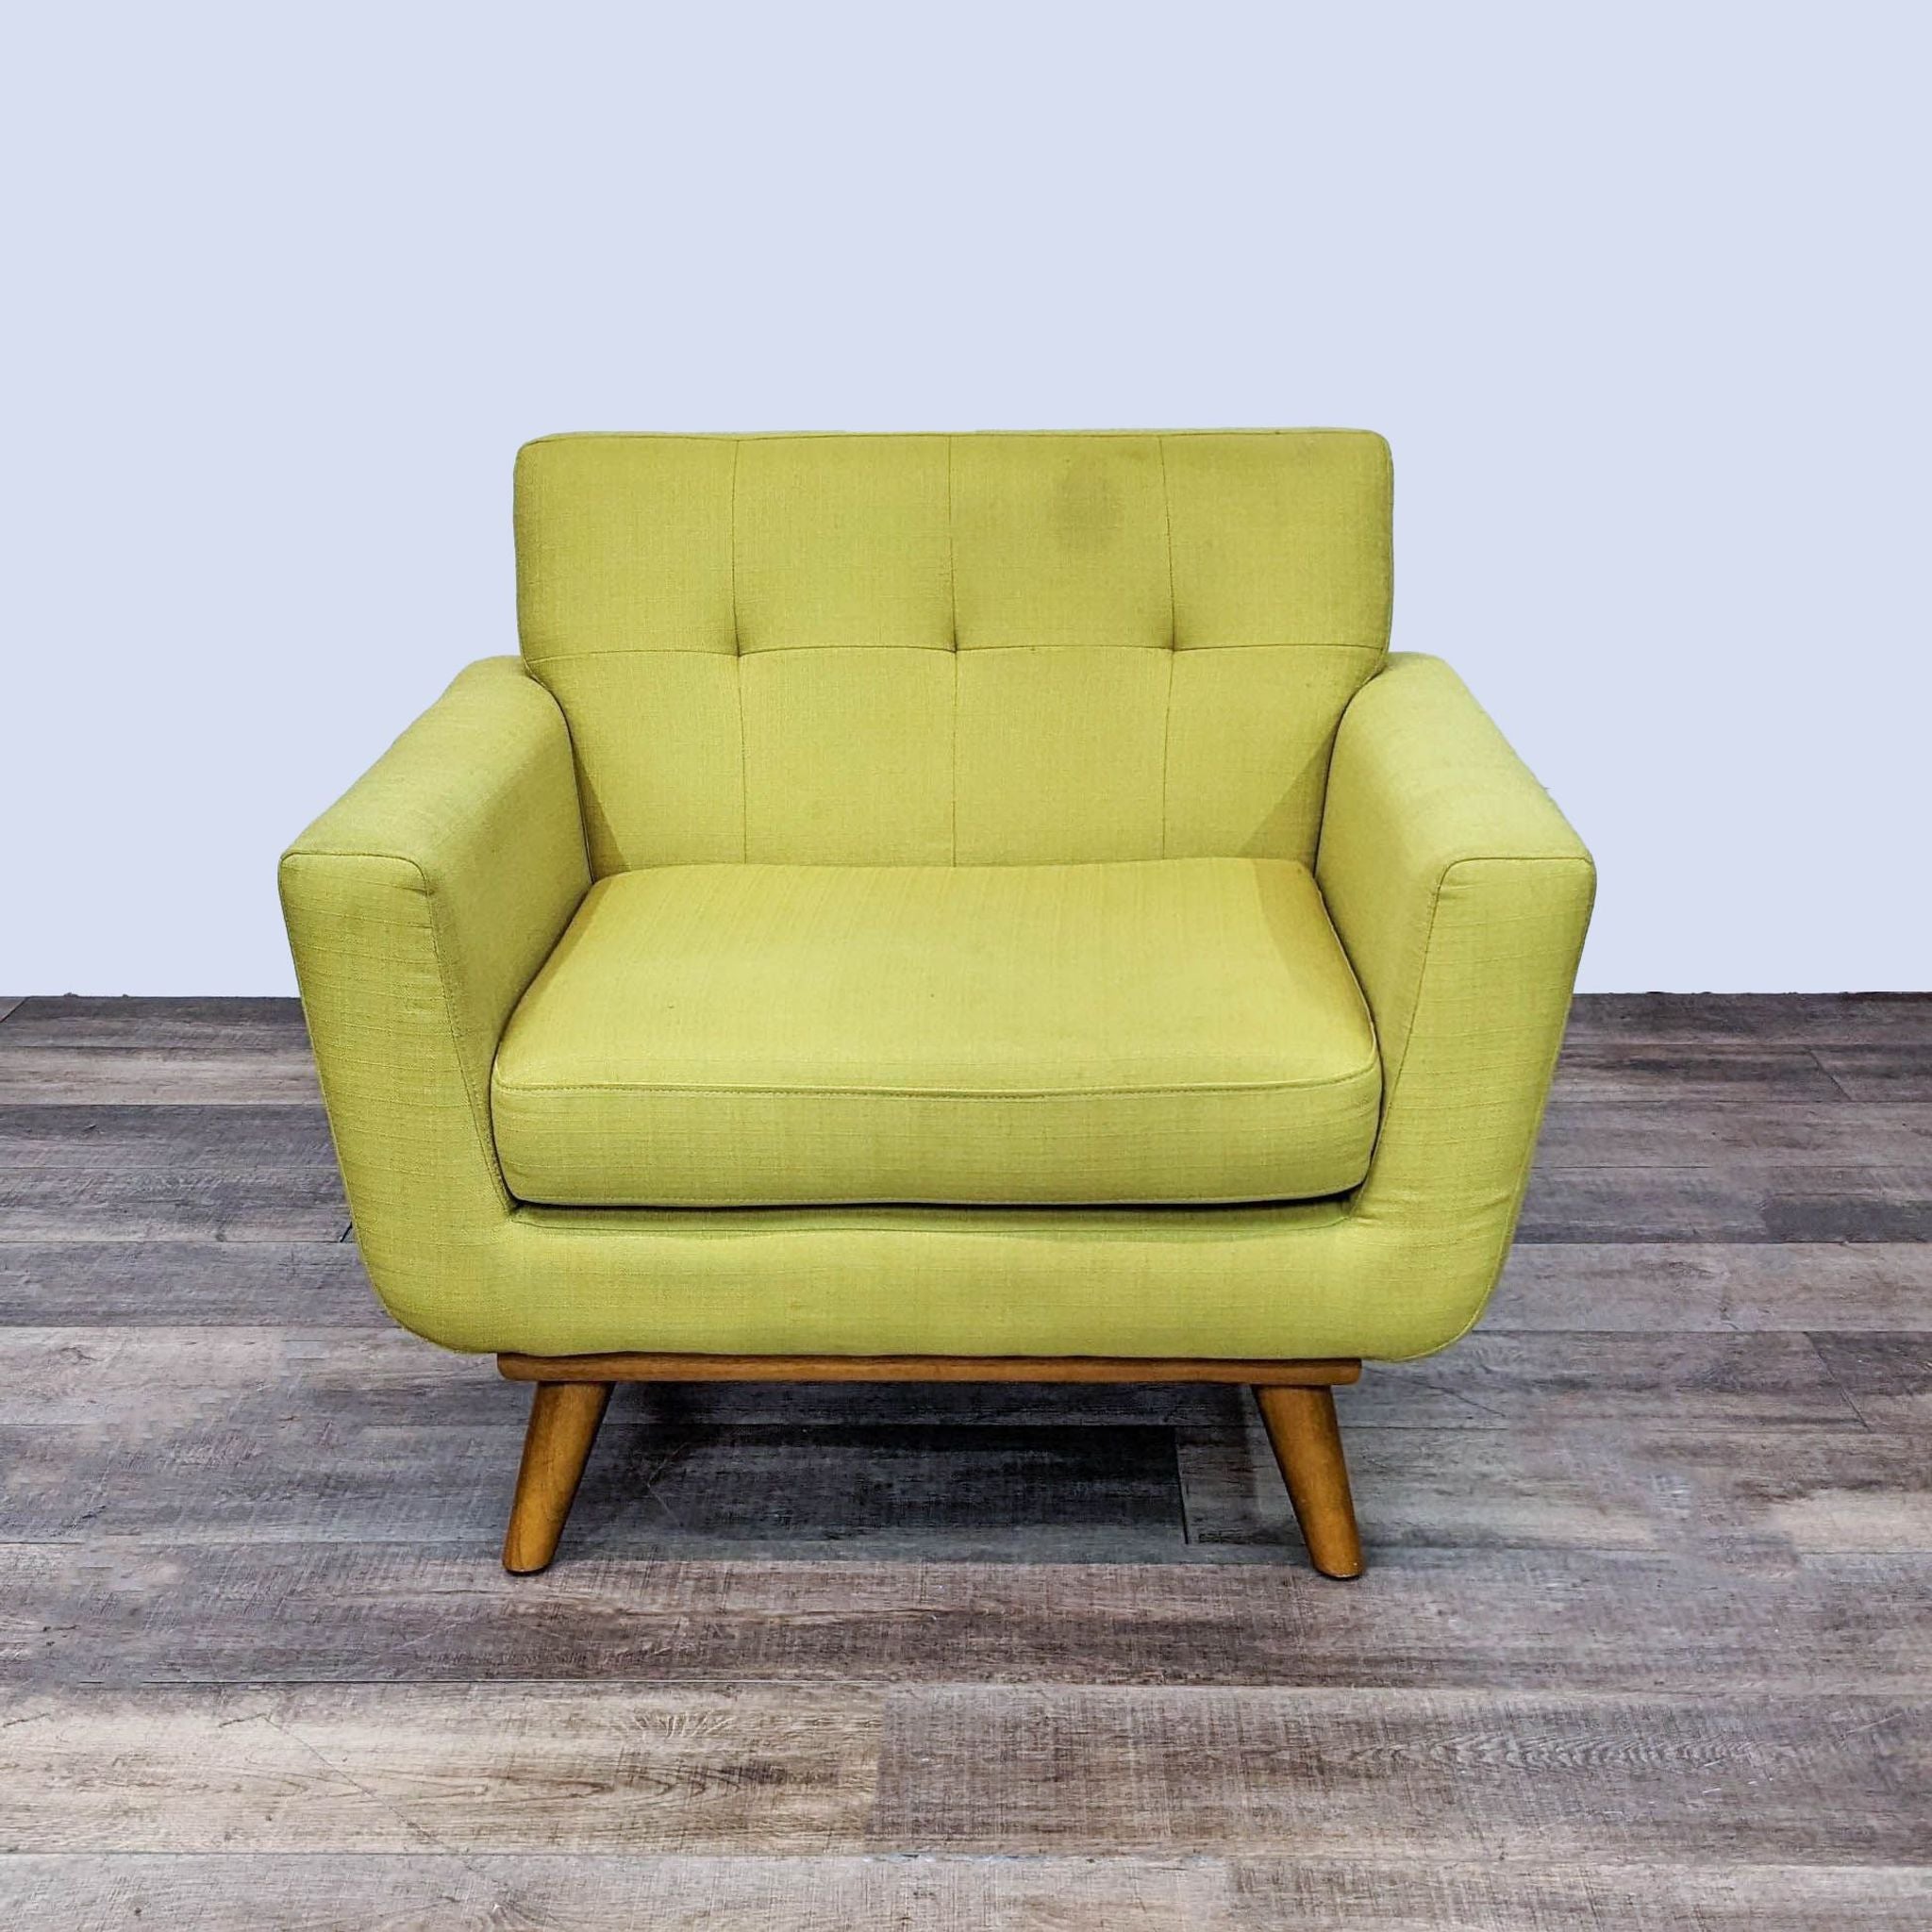 Modway Engage chair in mustard yellow with button tufting and angled wooden legs, mid-century modern design.